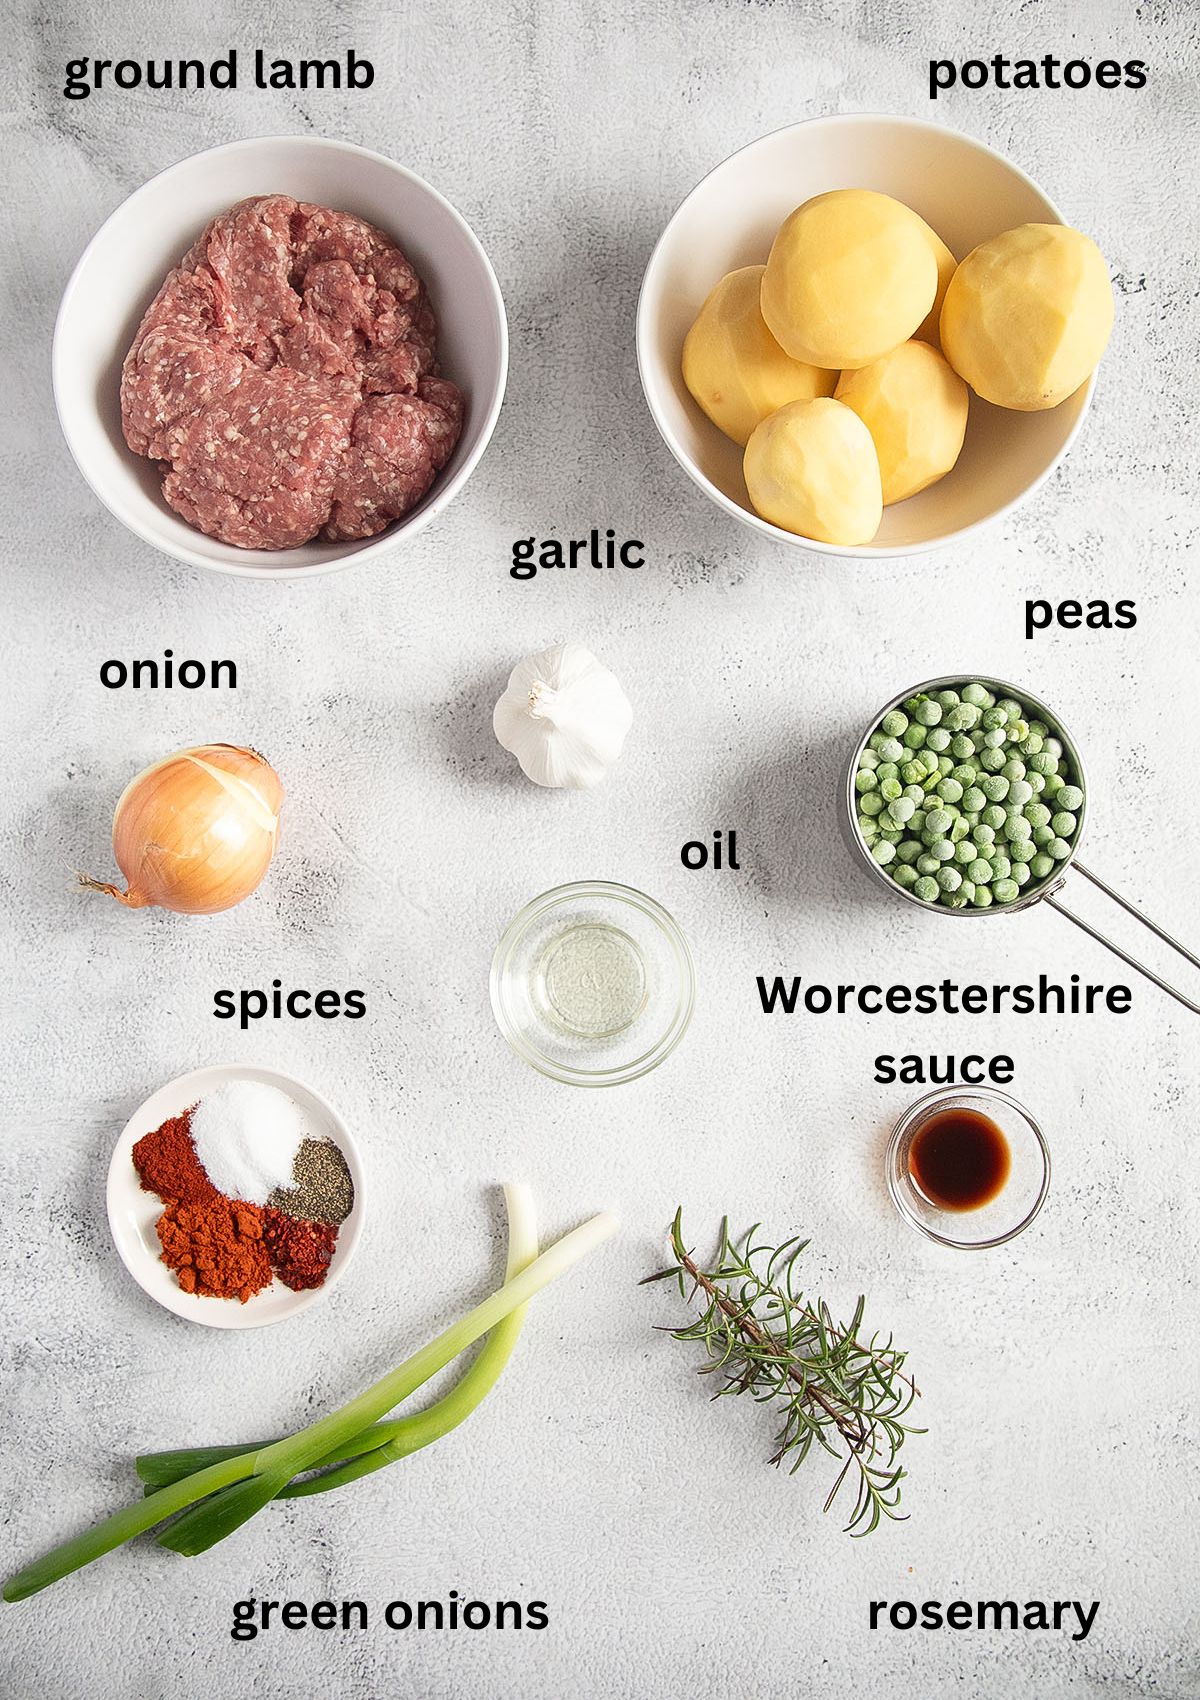 labeled ingredients for lamb with potatoes, peas, green onion, and rosemary.